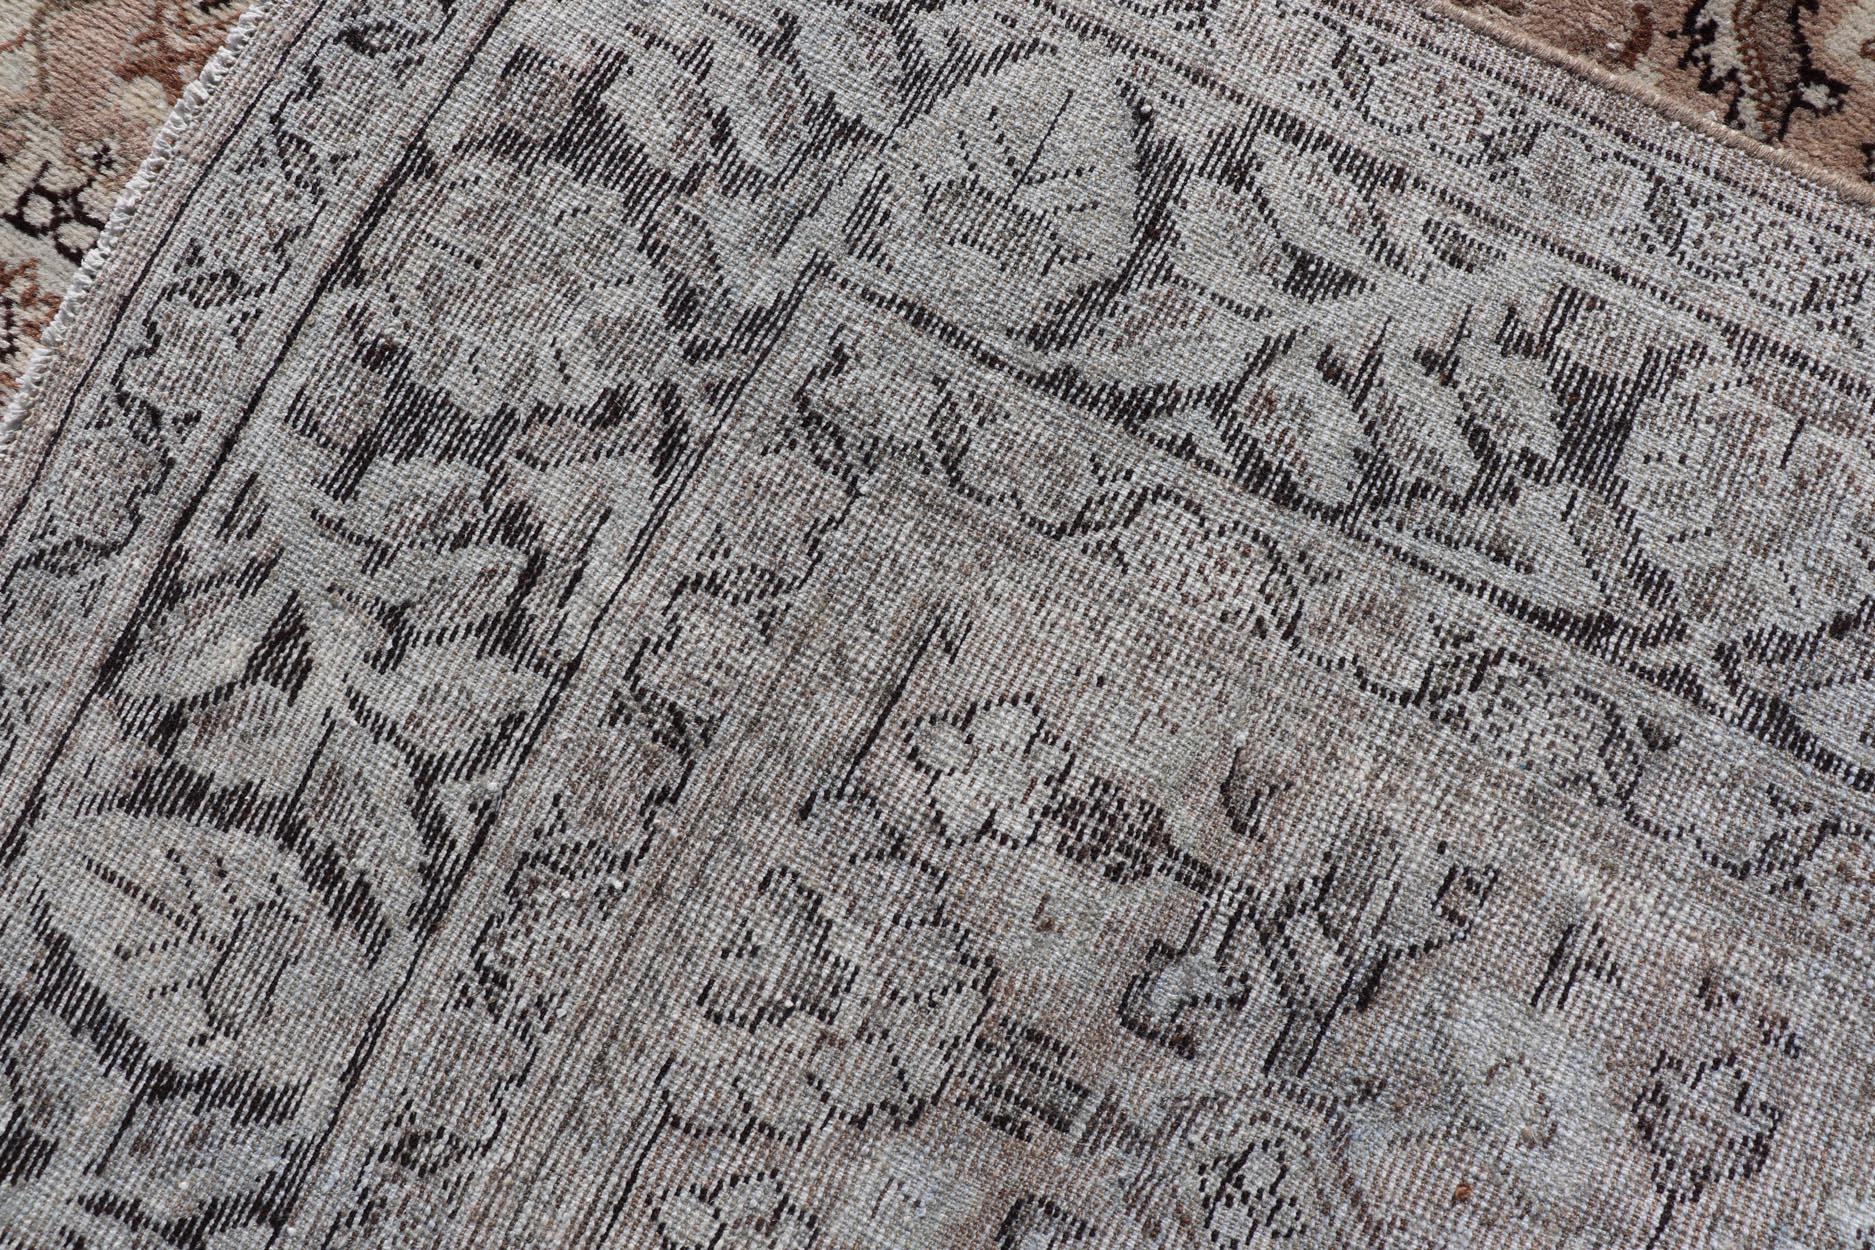 Vintage Sultanabad-Mahal Rug with All-Over Sub-Geometric Medallion Design For Sale 7